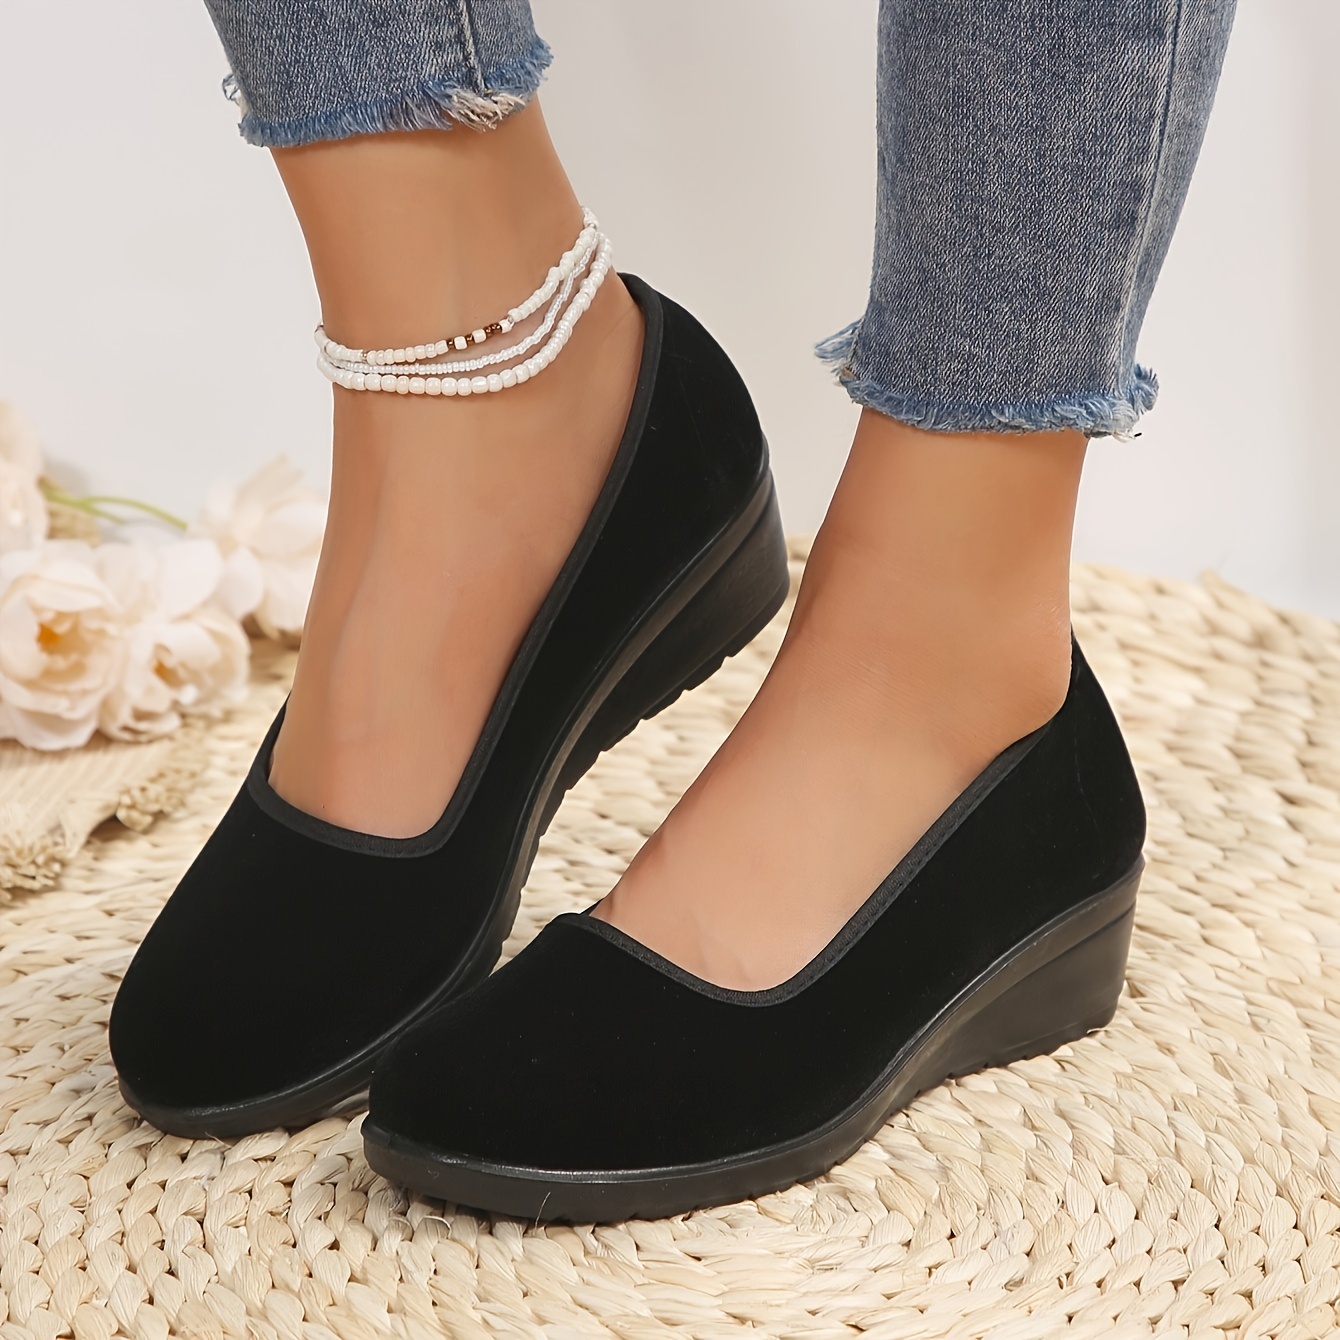 

Women's Solid Color Wedge Heeled Shoes, Casual Slip On Platform Shoes, Women's Comfortable Shoes